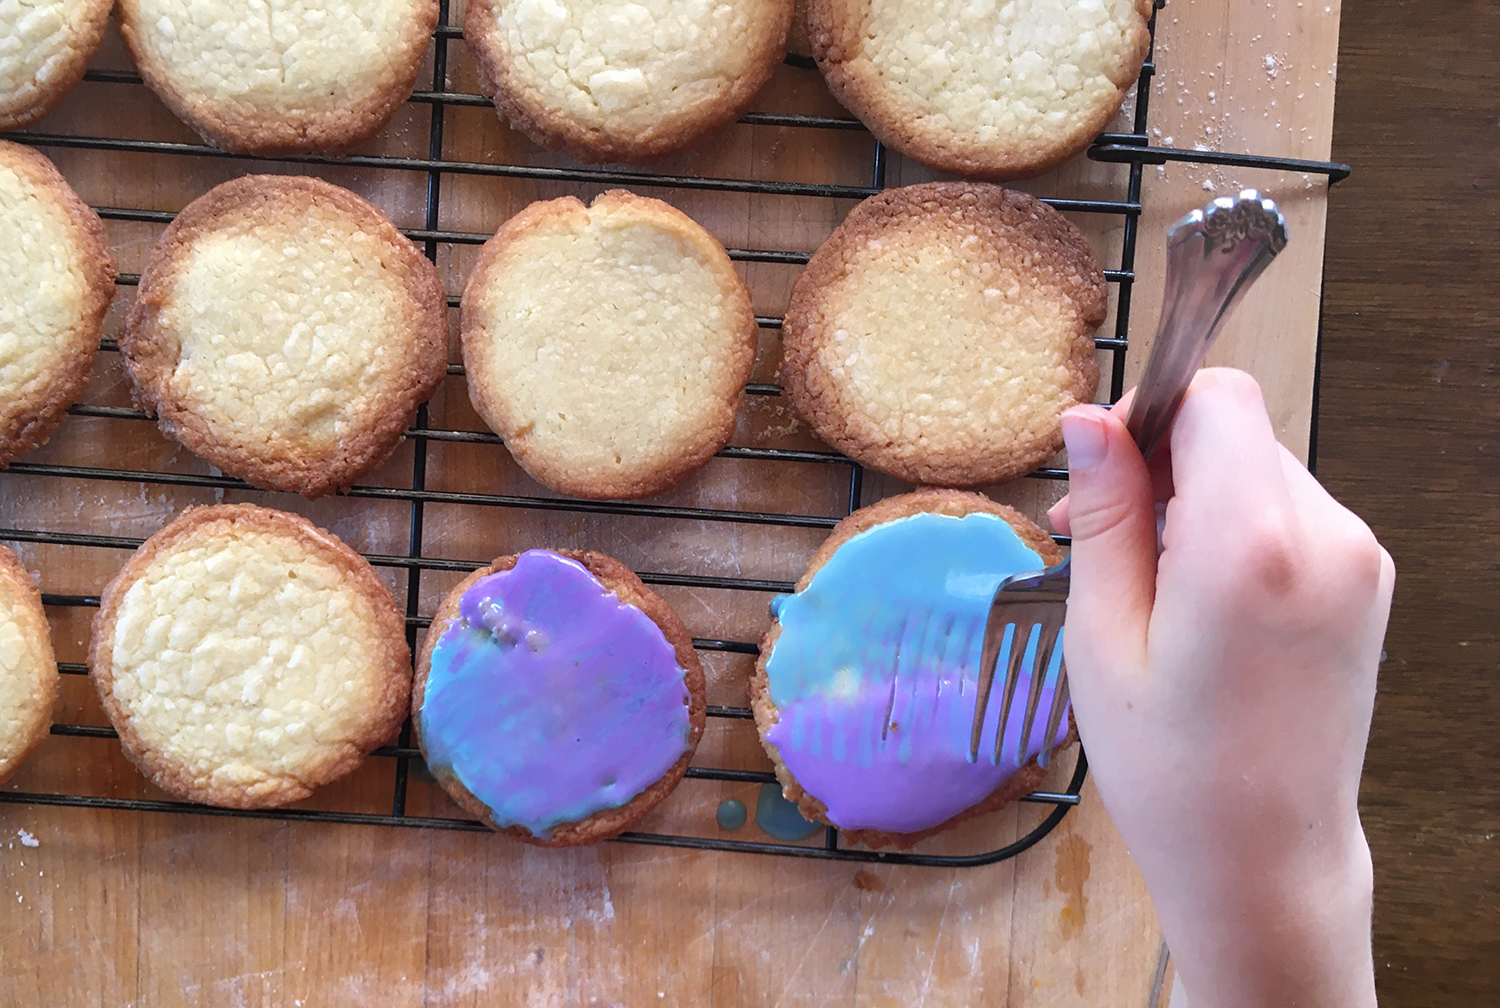 Cookies shown from above as someone uses a fork to swirl frosting